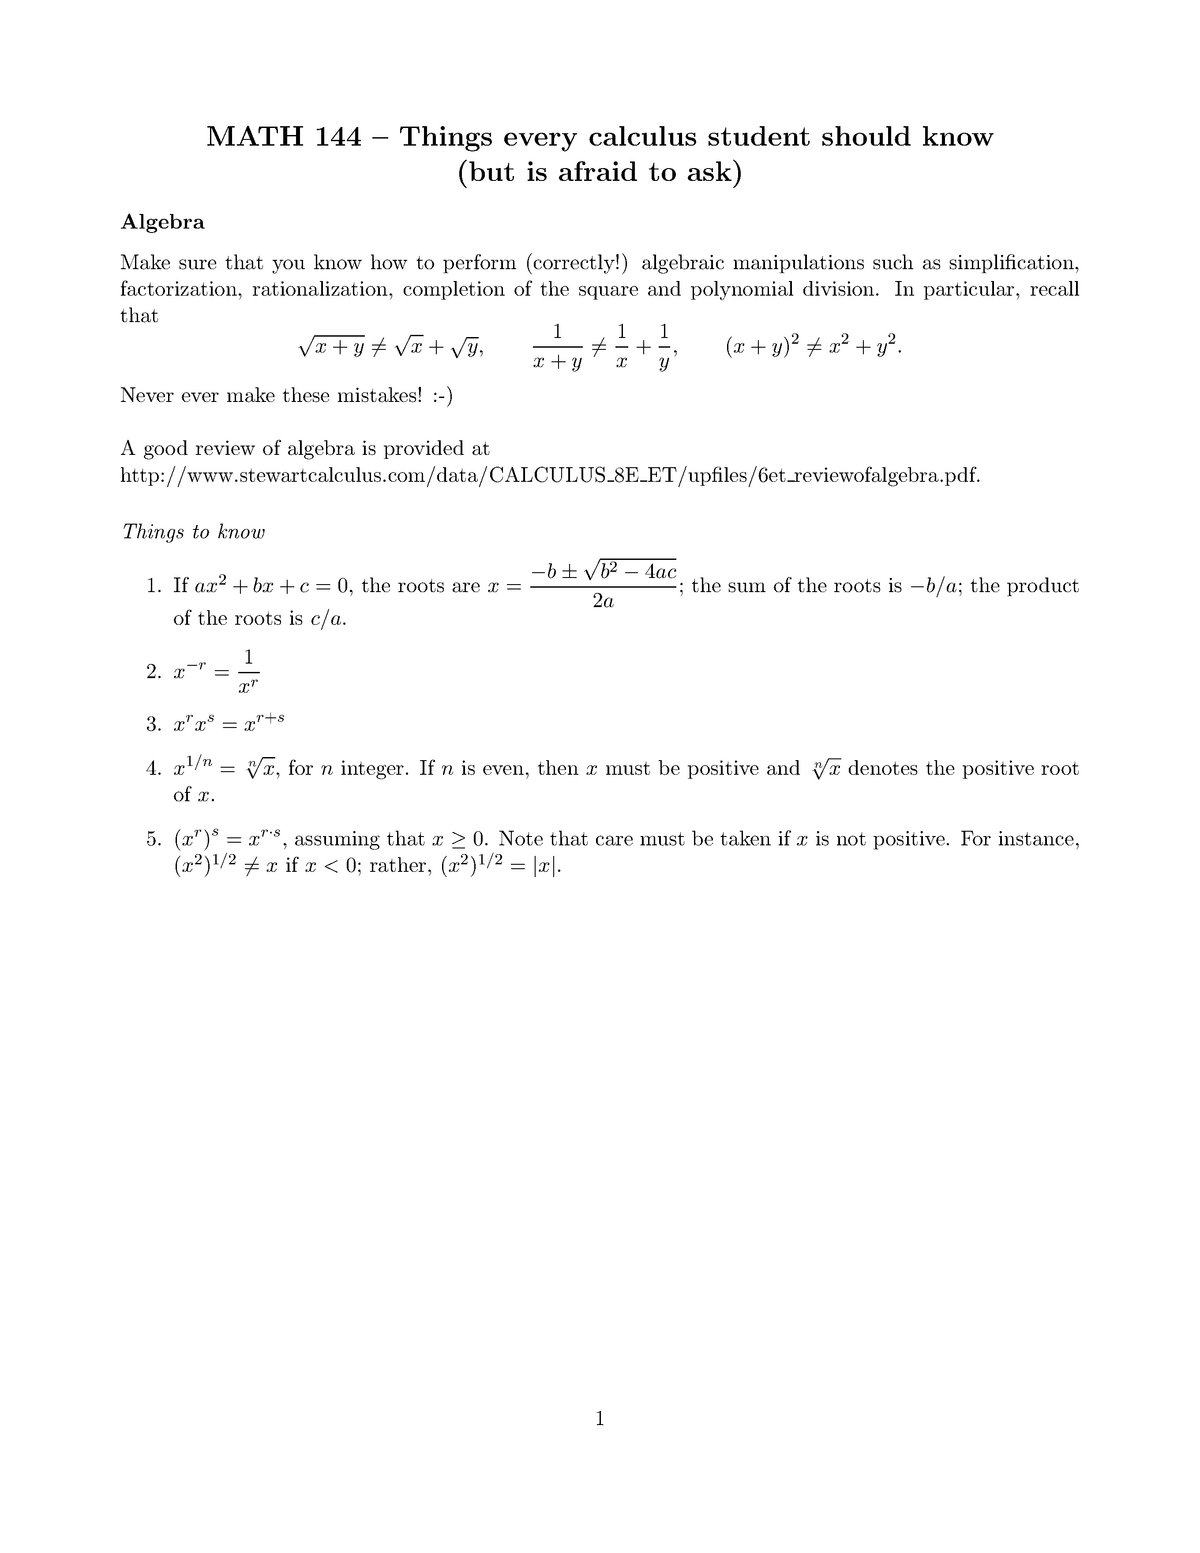 Bus Calculus Pdf : Introduction to calculus and analysis. - It's Me Reza